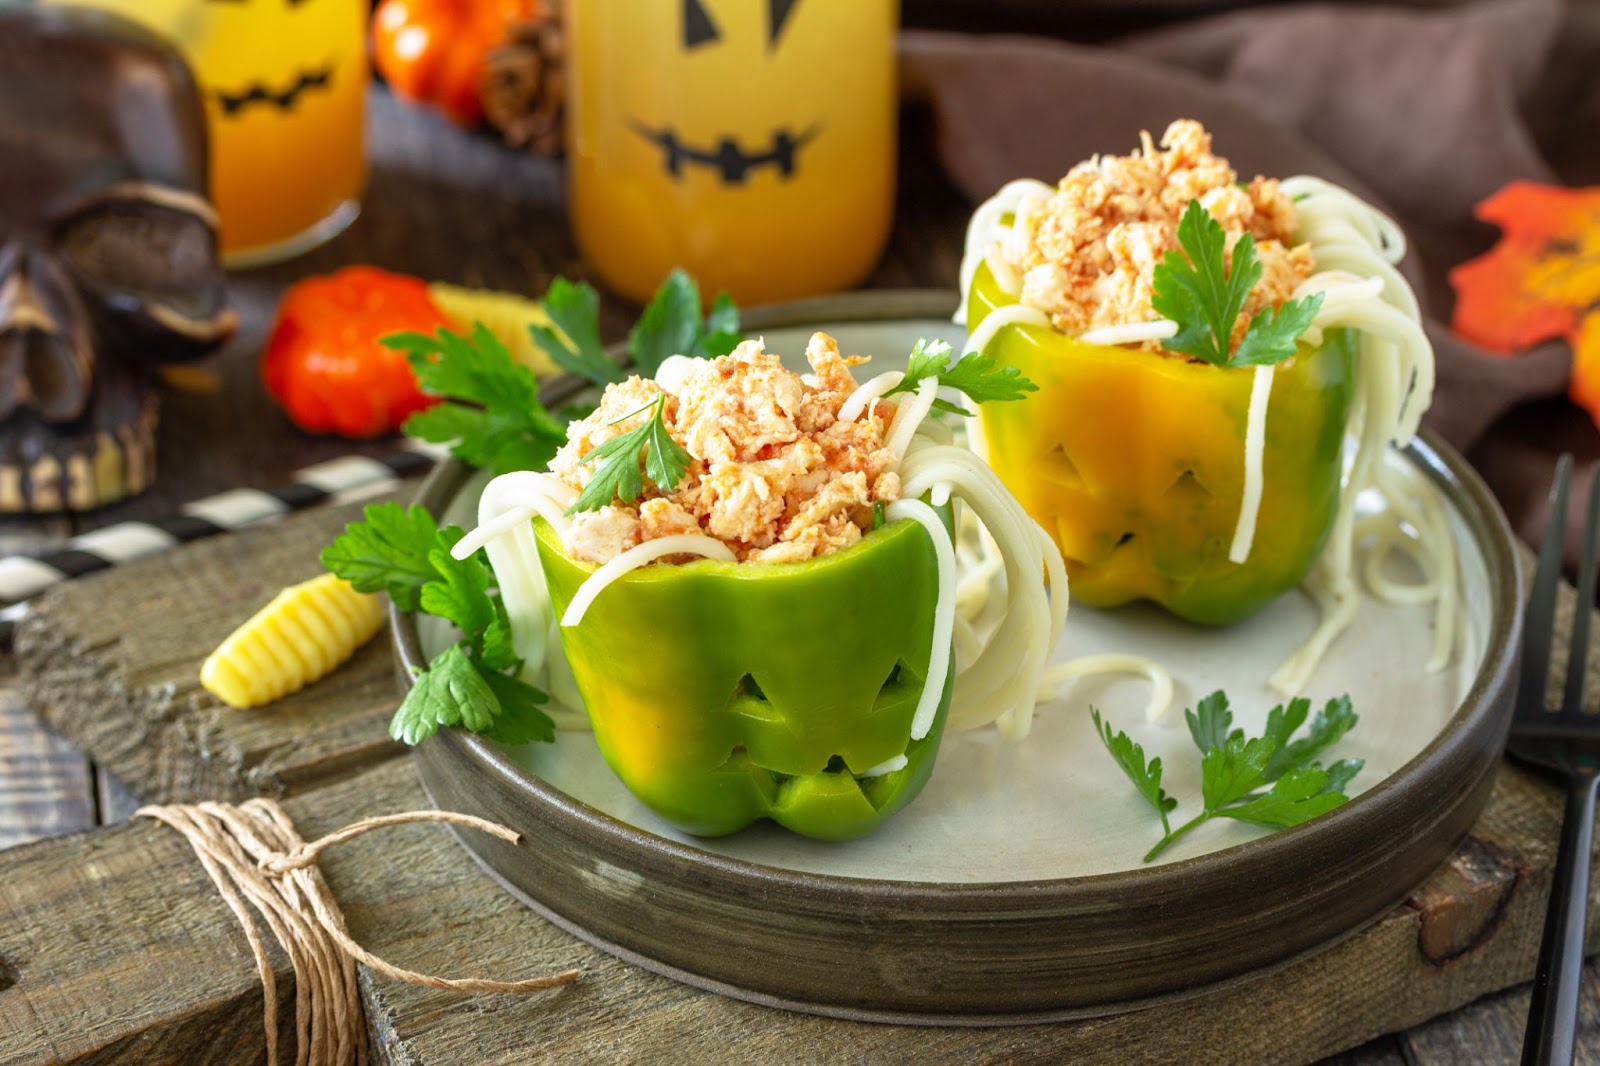 Bell peppers cut into halloween shapes and stuffed with zoodles and bolognese